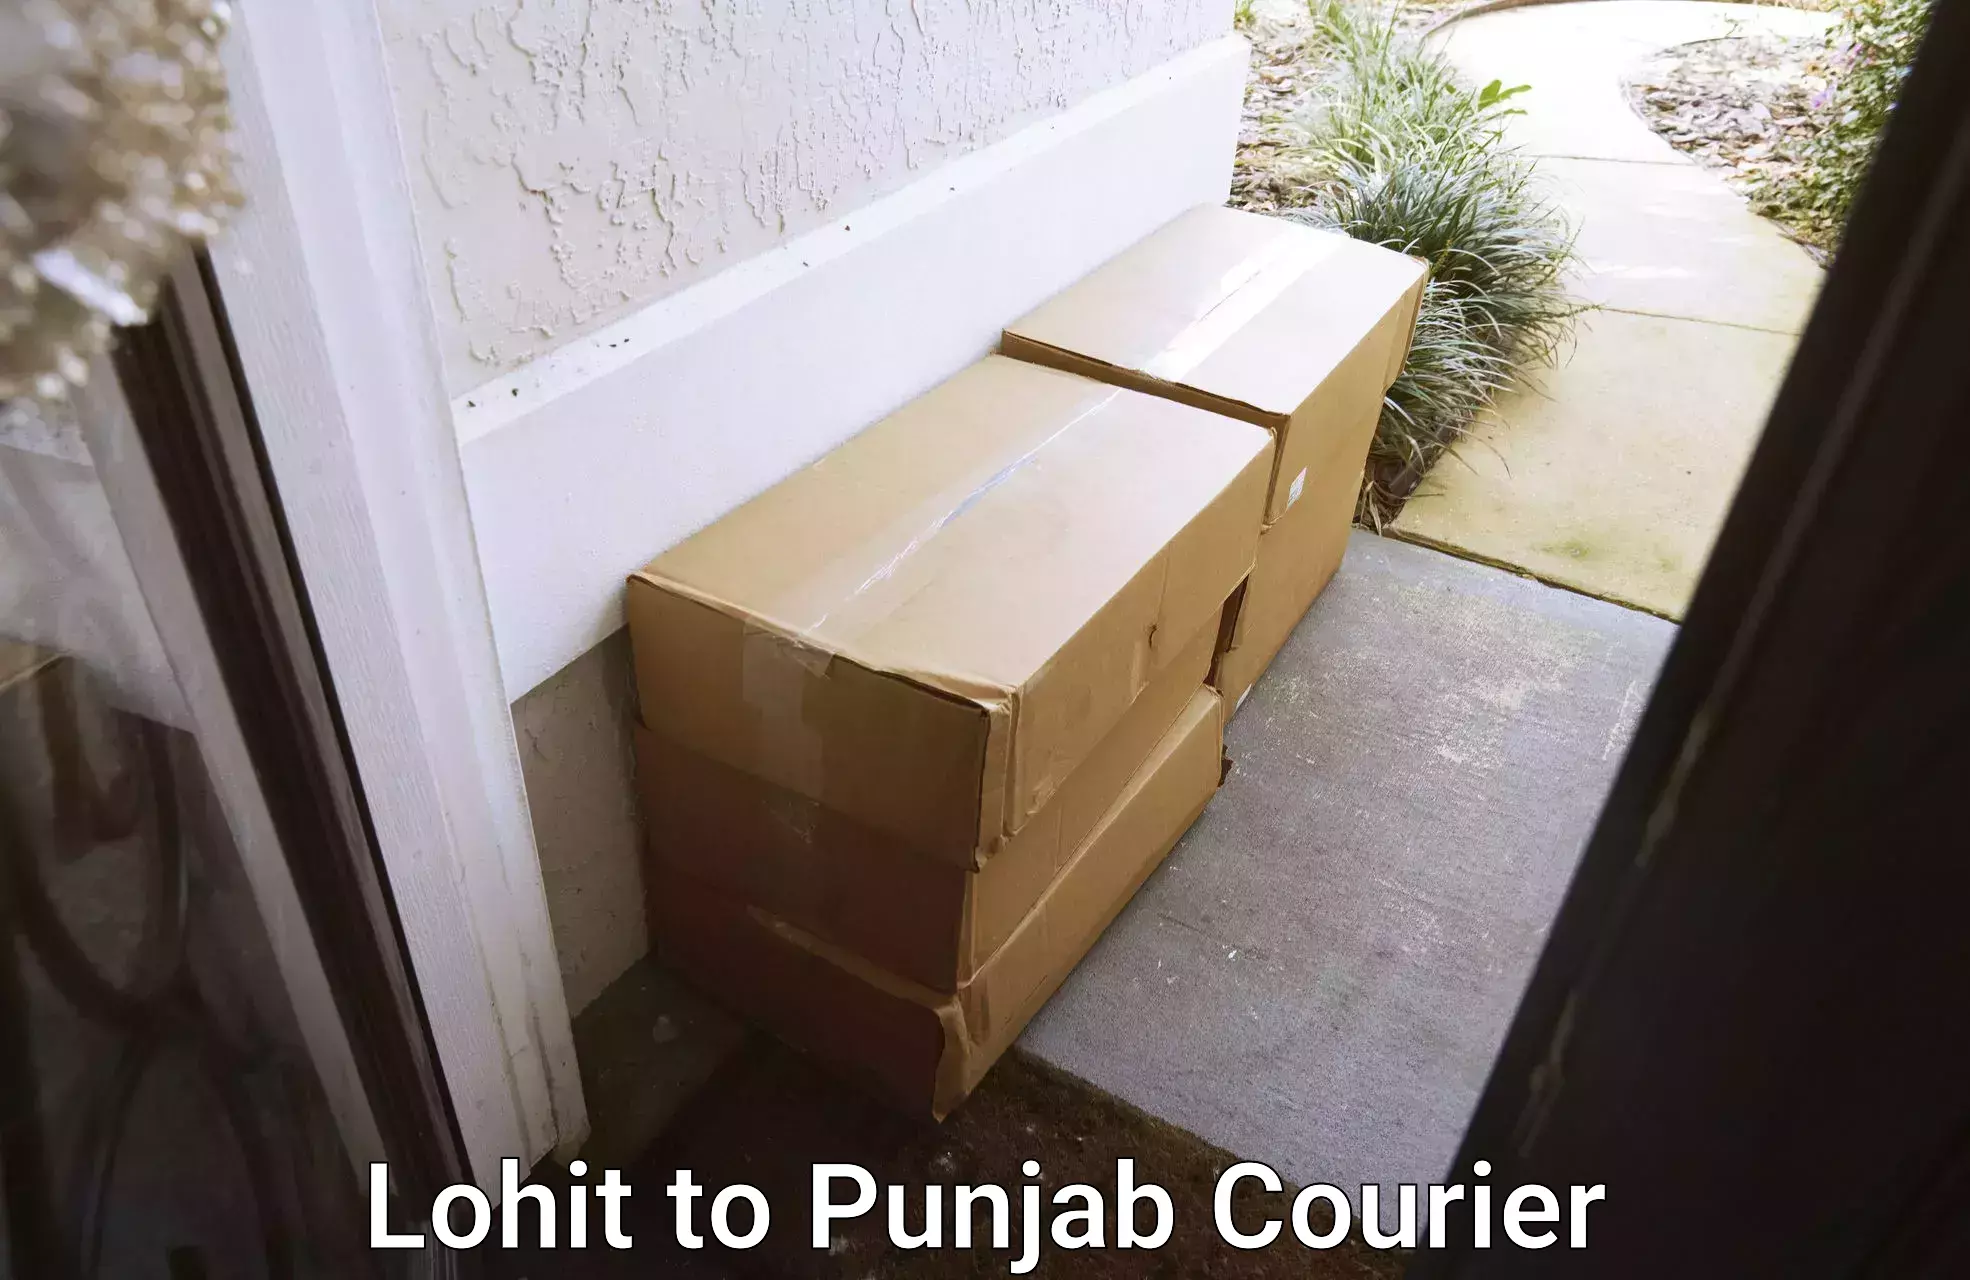 Courier service partnerships Lohit to Bhadaur